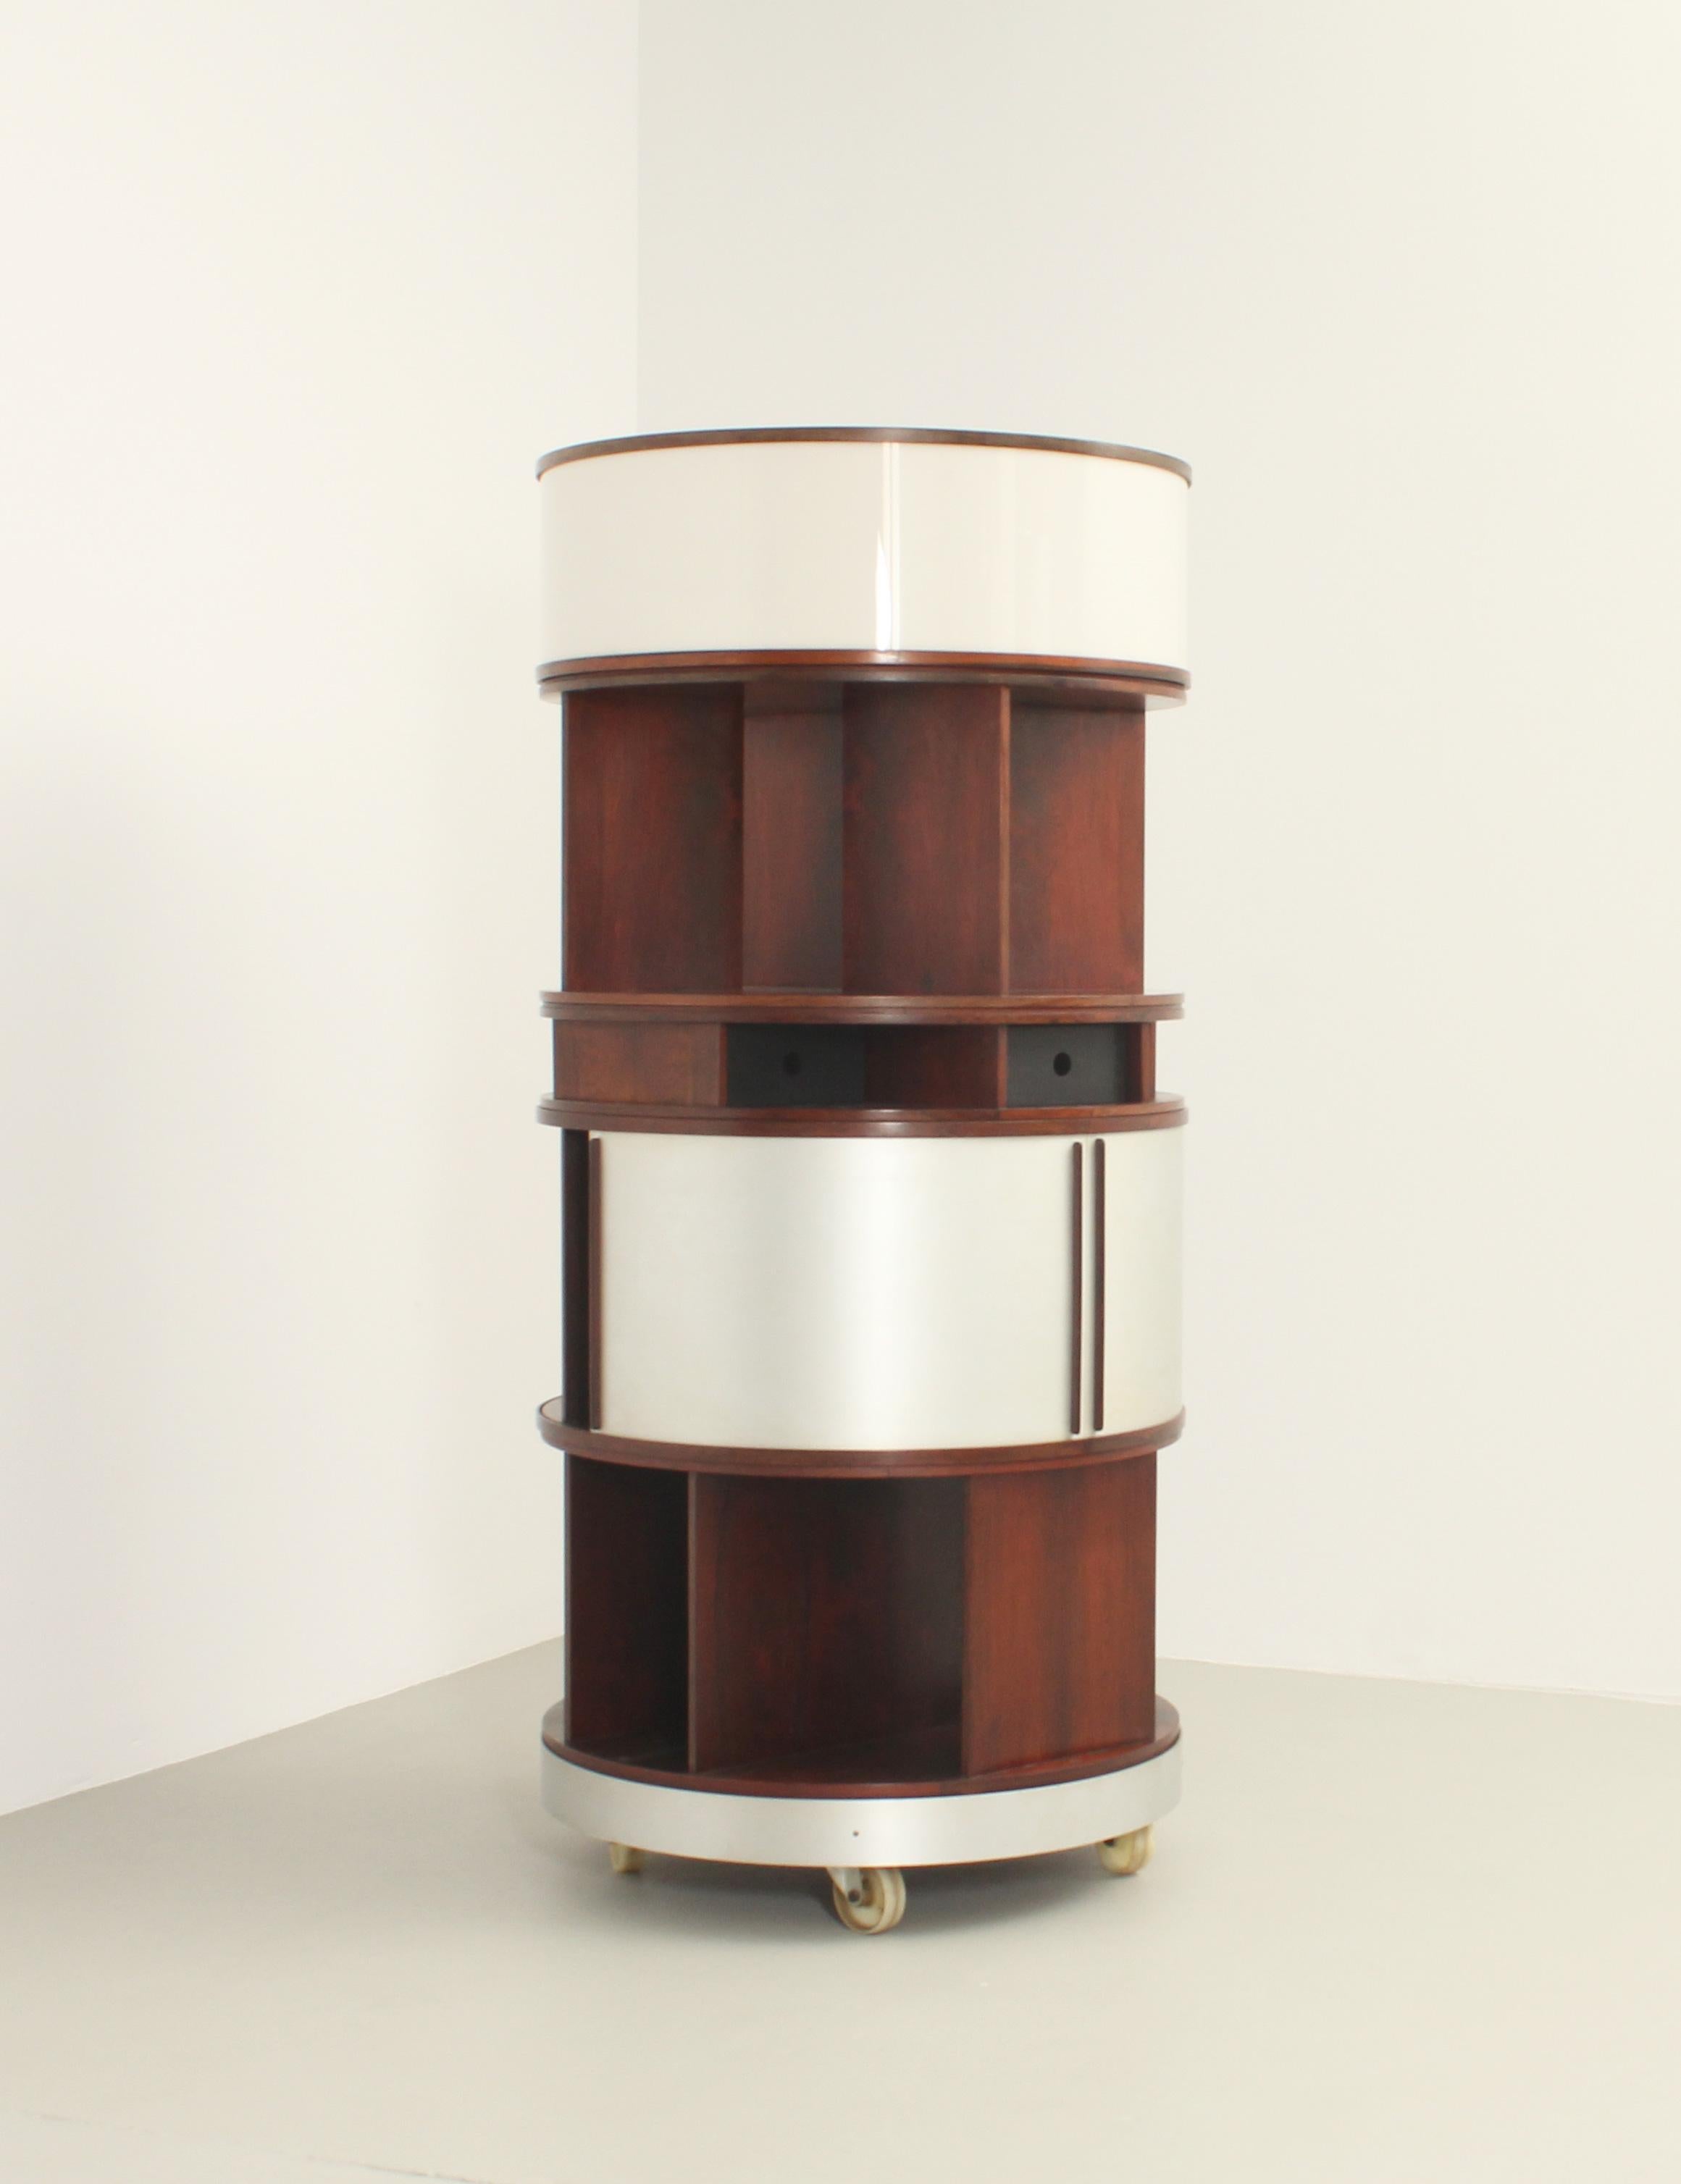 Combi Center storage unit designed in 1963 by Joe Colombo for Bernini, Italy. Large version with built-in lighting. Hardwood, acrylic, lacquered wood and brushed aluminum. Awarded a Silver Medal at the XIII Triennale di Milano in 1964.